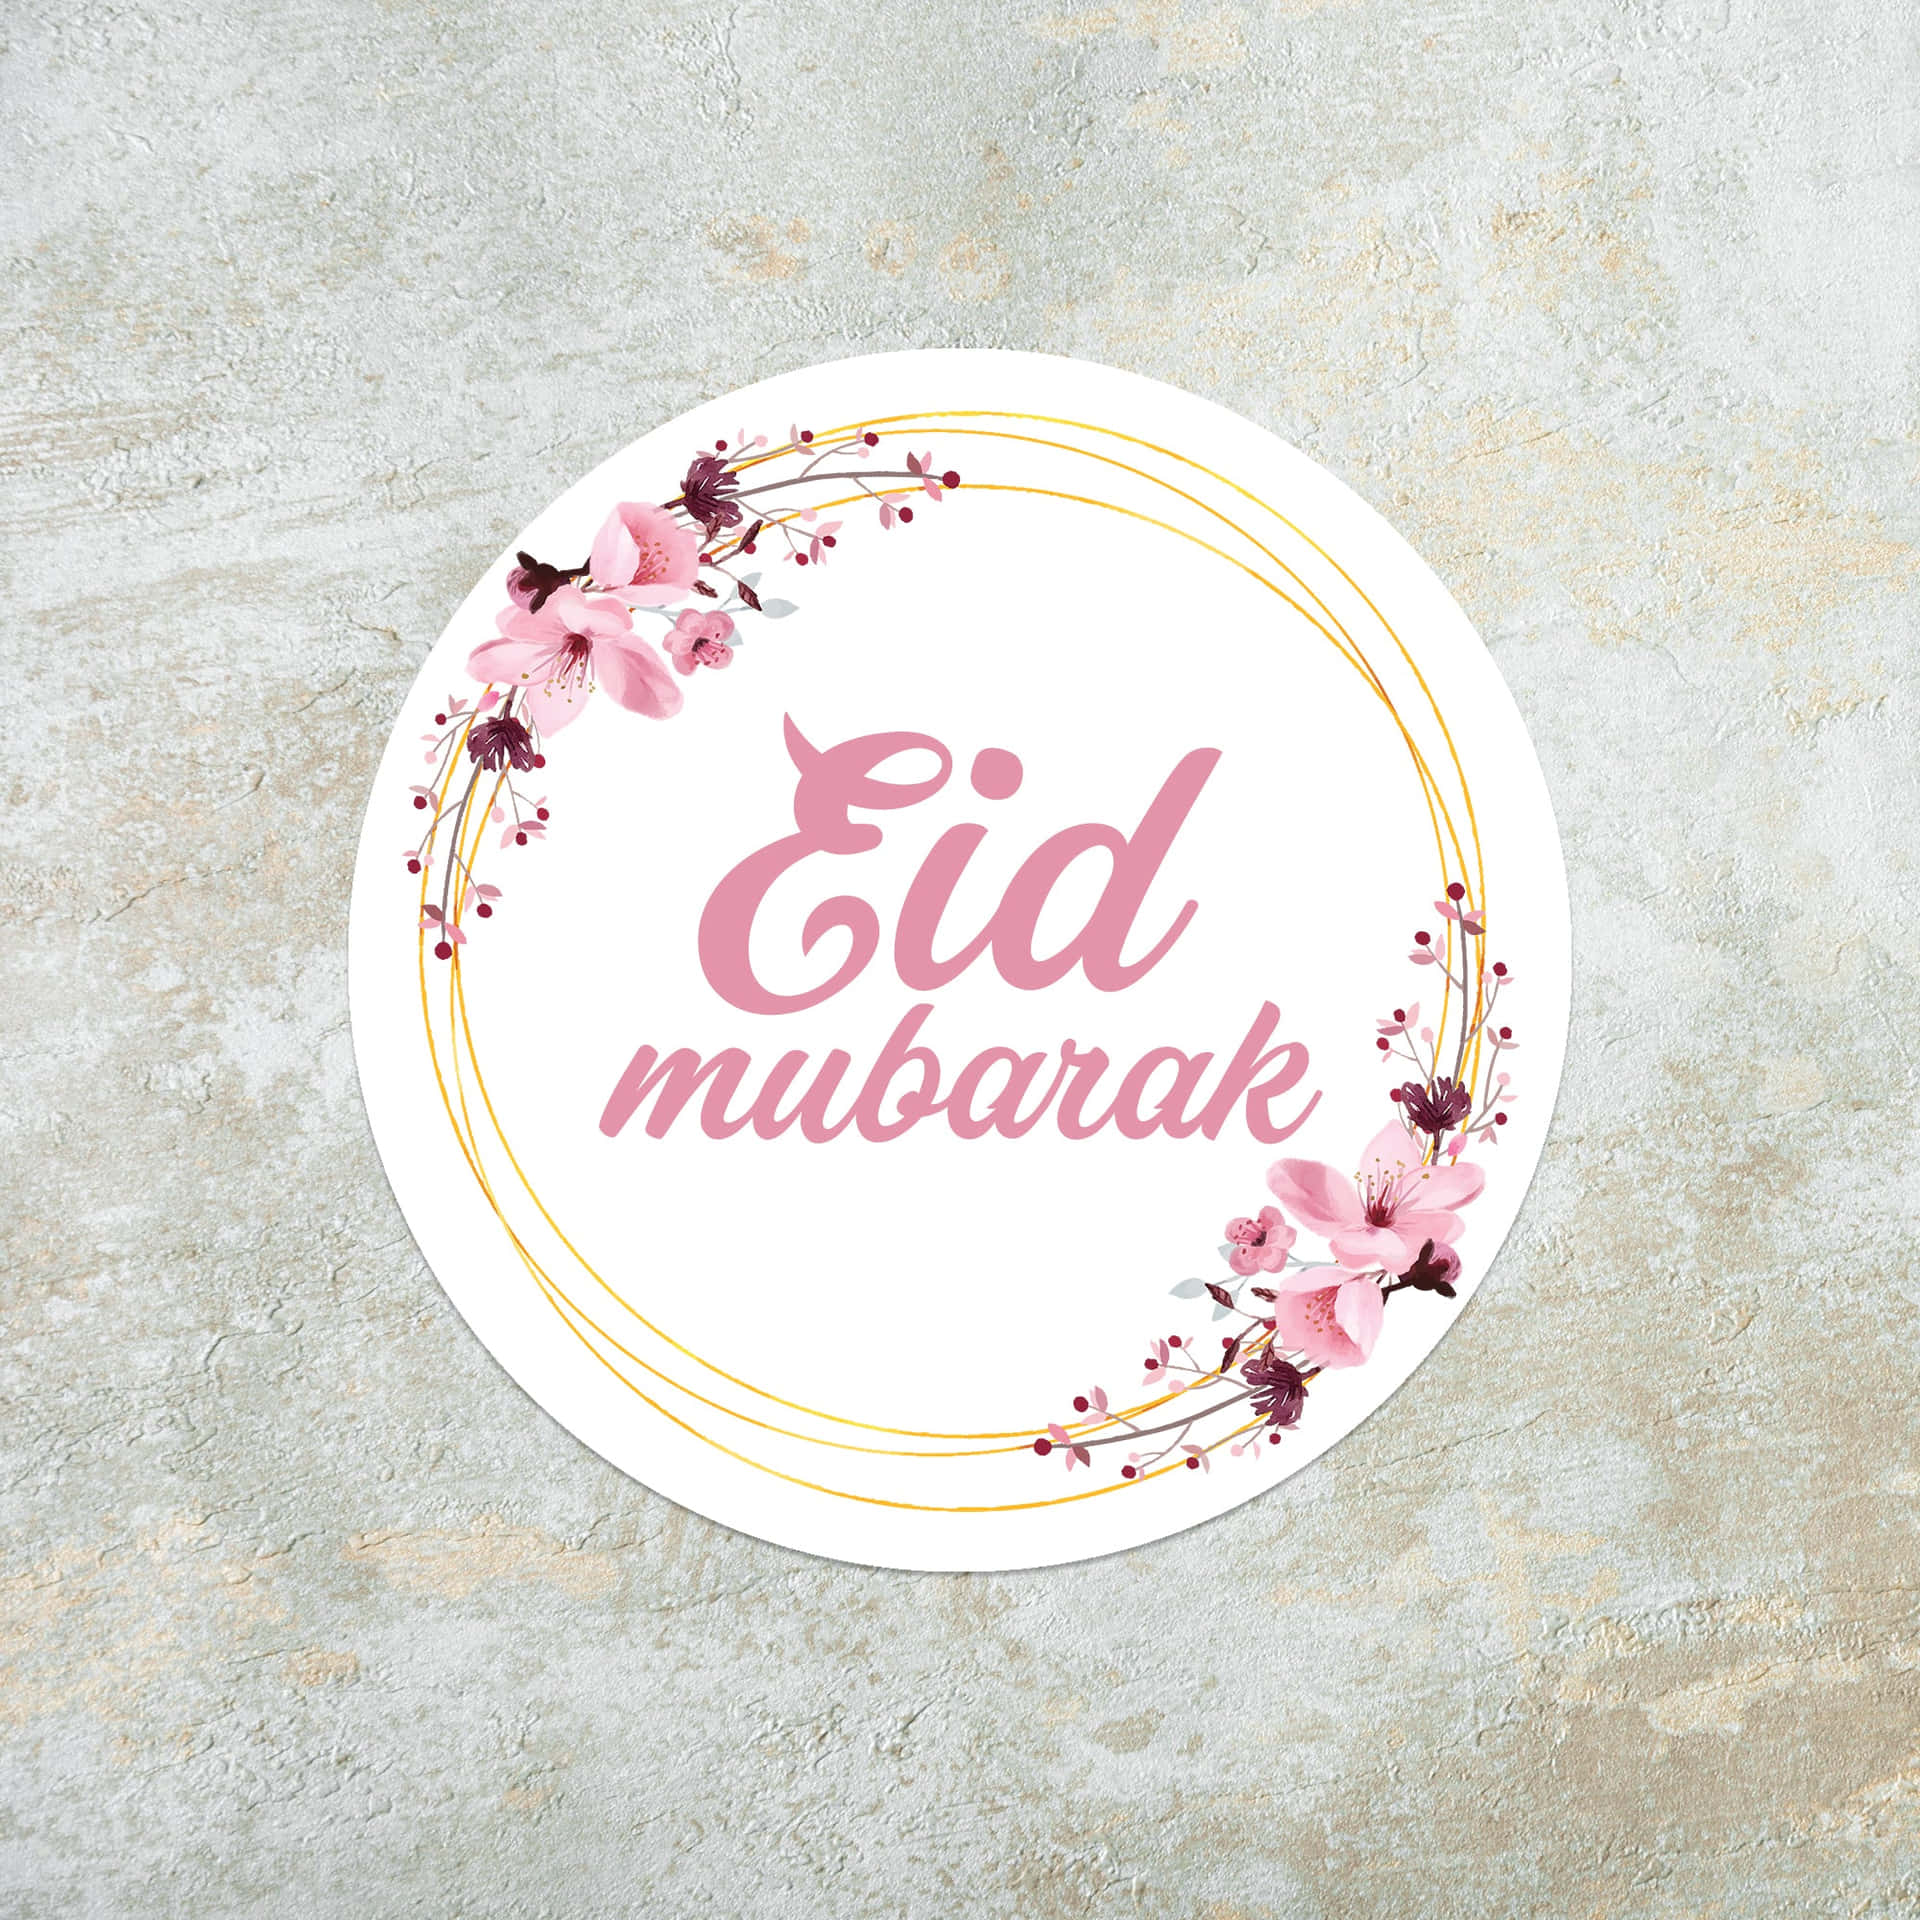 Celebrate Eid Mubarak with love, family and friends.